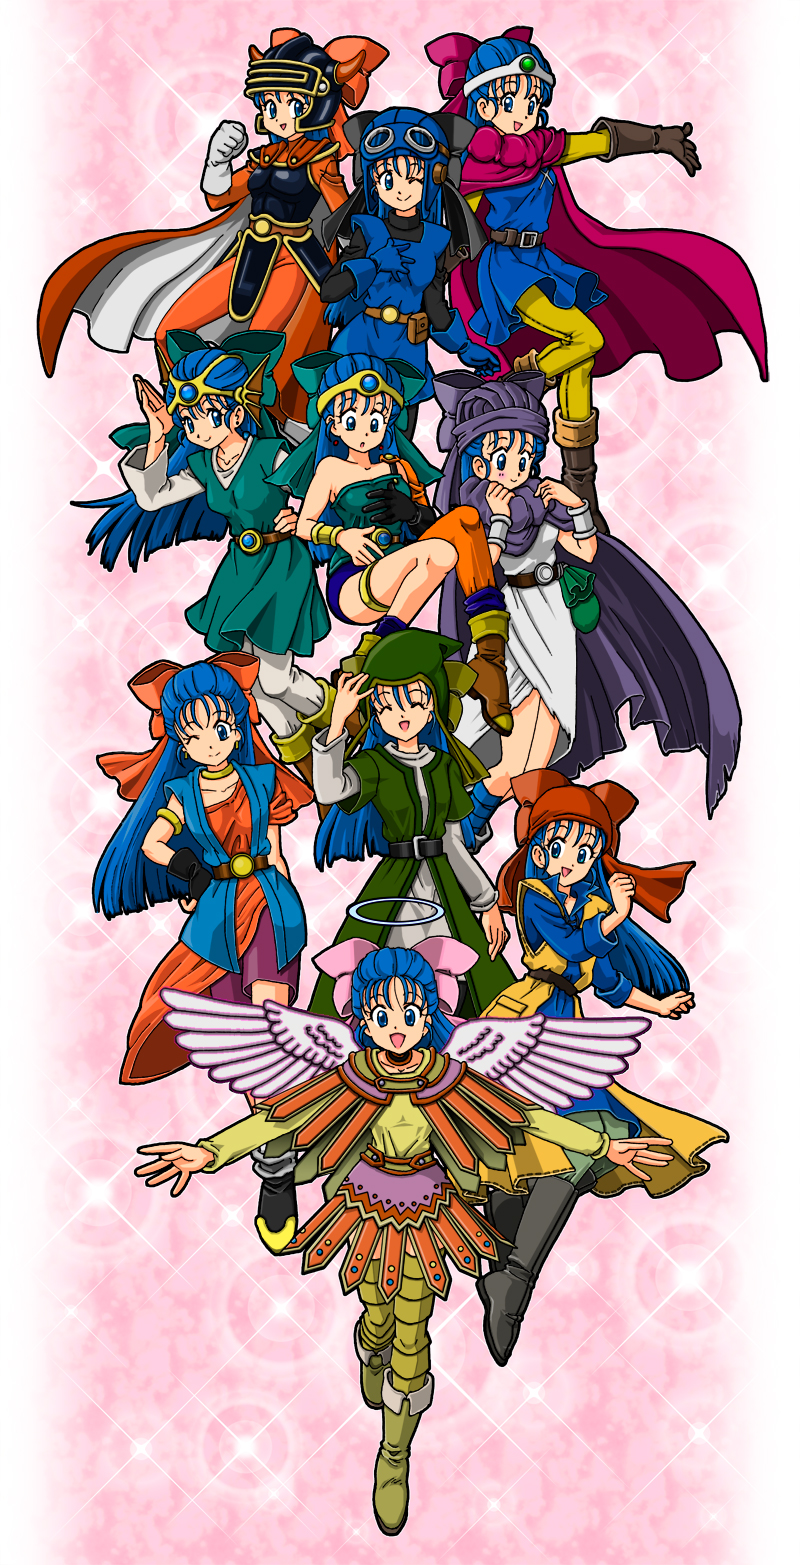 anklet armor asymmetrical_clothes asymmetrical_clothing bandana bandanna belt blue_eyes blue_hair blush boots bow bracelet cape circlet closed_eyes cosplay detached_sleeves dragon_quest dragon_quest_i dragon_quest_ii dragon_quest_iii dragon_quest_iv dragon_quest_ix dragon_quest_v dragon_quest_vi dragon_quest_vii dragon_quest_viii earrings eyes_closed fingerless_gloves flora gloves goggles hair_bow halo hat helmet hero_(dq1) hero_(dq1)_(cosplay) hero_(dq4) hero_(dq4)_(cosplay) hero_(dq5) hero_(dq5)_(cosplay) hero_(dq6) hero_(dq6)_(cosplay) hero_(dq7) hero_(dq7)_(cosplay) hero_(dq8) hero_(dq8)_(cosplay) heroine_(dq4) heroine_(dq4)_(cosplay) heroine_(dq9) heroine_(dq9)_(cosplay) highres jewelry long_hair nika_(20090103-sta) prince_of_lorasia prince_of_lorasia_(cosplay) roto roto_(cosplay) single_glove skirt smile thigh-highs thighhighs turban wings wink